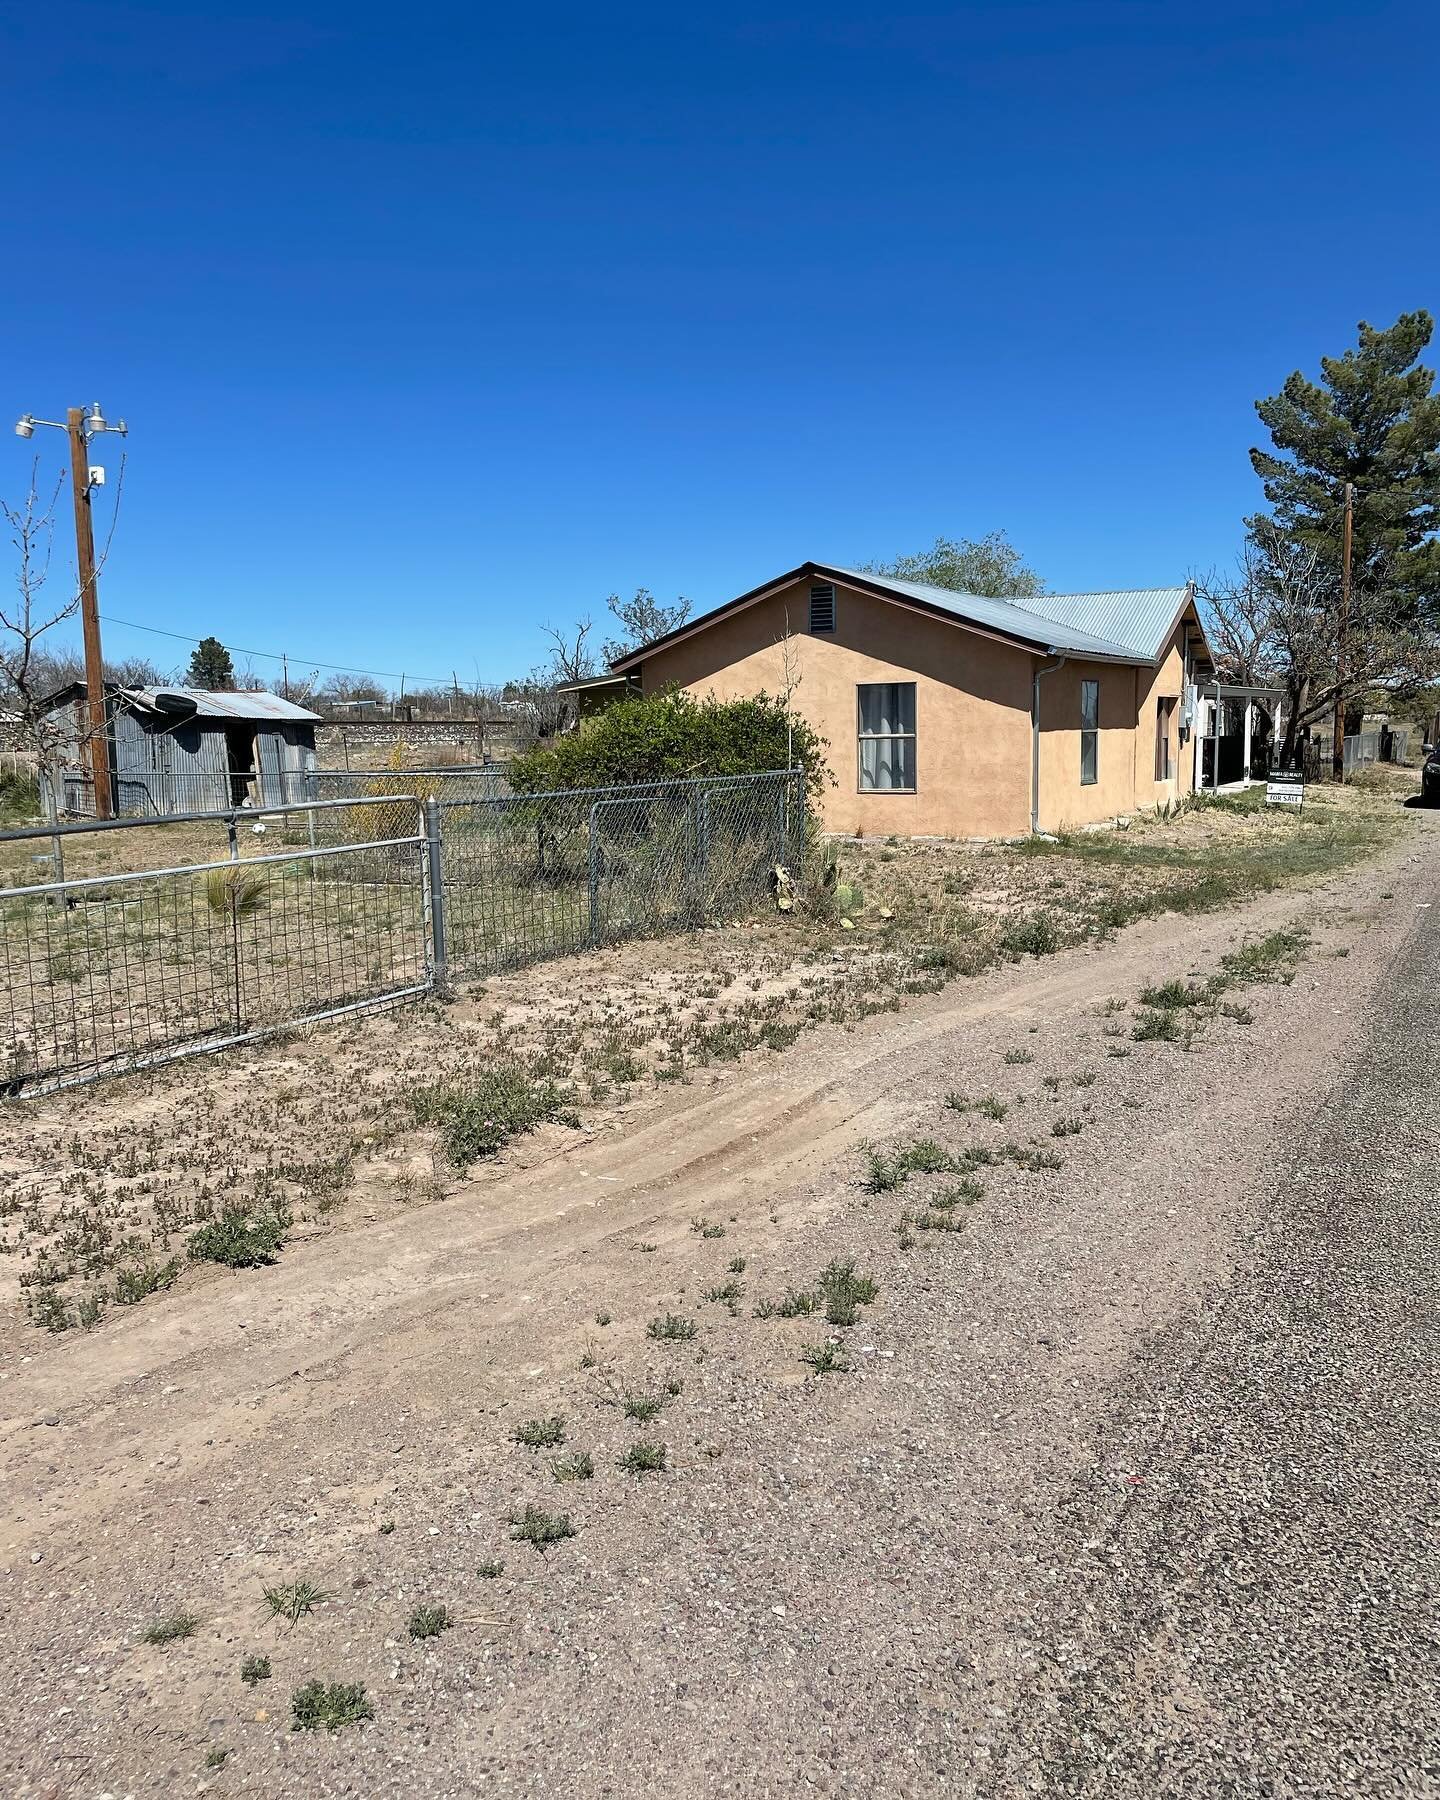 1316 W Fremont St. 2 Bedroom / 2 Bathroom property partially renovated with new mudroom / bathroom and laundry / extra large double lot / north west area of Marfa 2 blocks from Marfa&rsquo;s eateries The Waterstop / Bordo &amp; Convenience West $294,